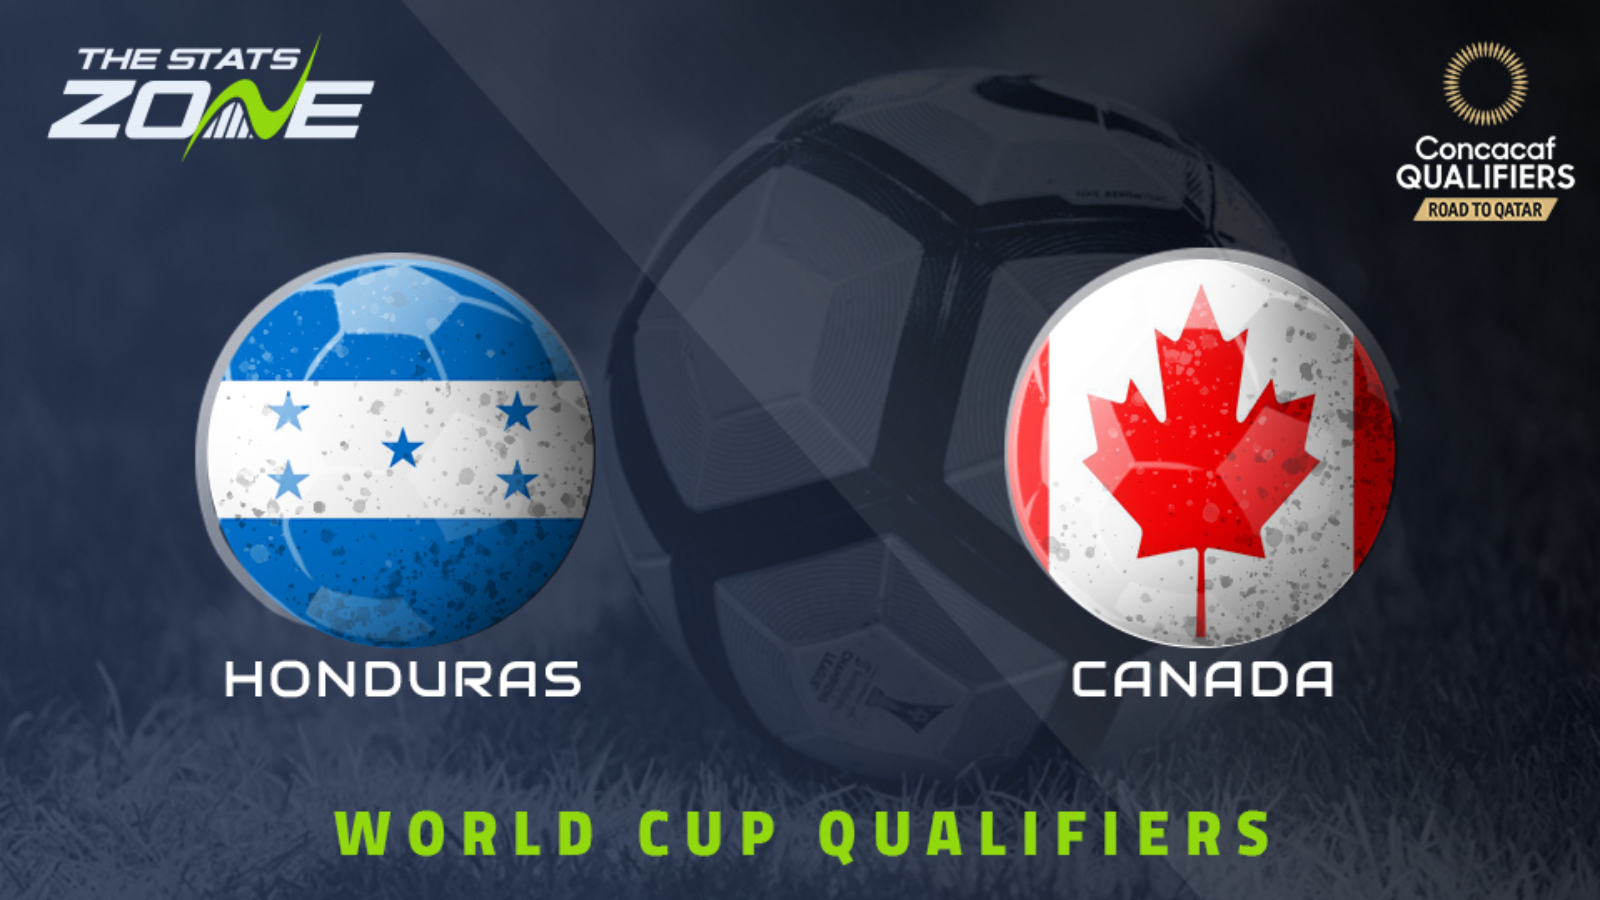 FIFA World Cup 2022 CONCACAF Qualifiers Honduras vs Canada Preview